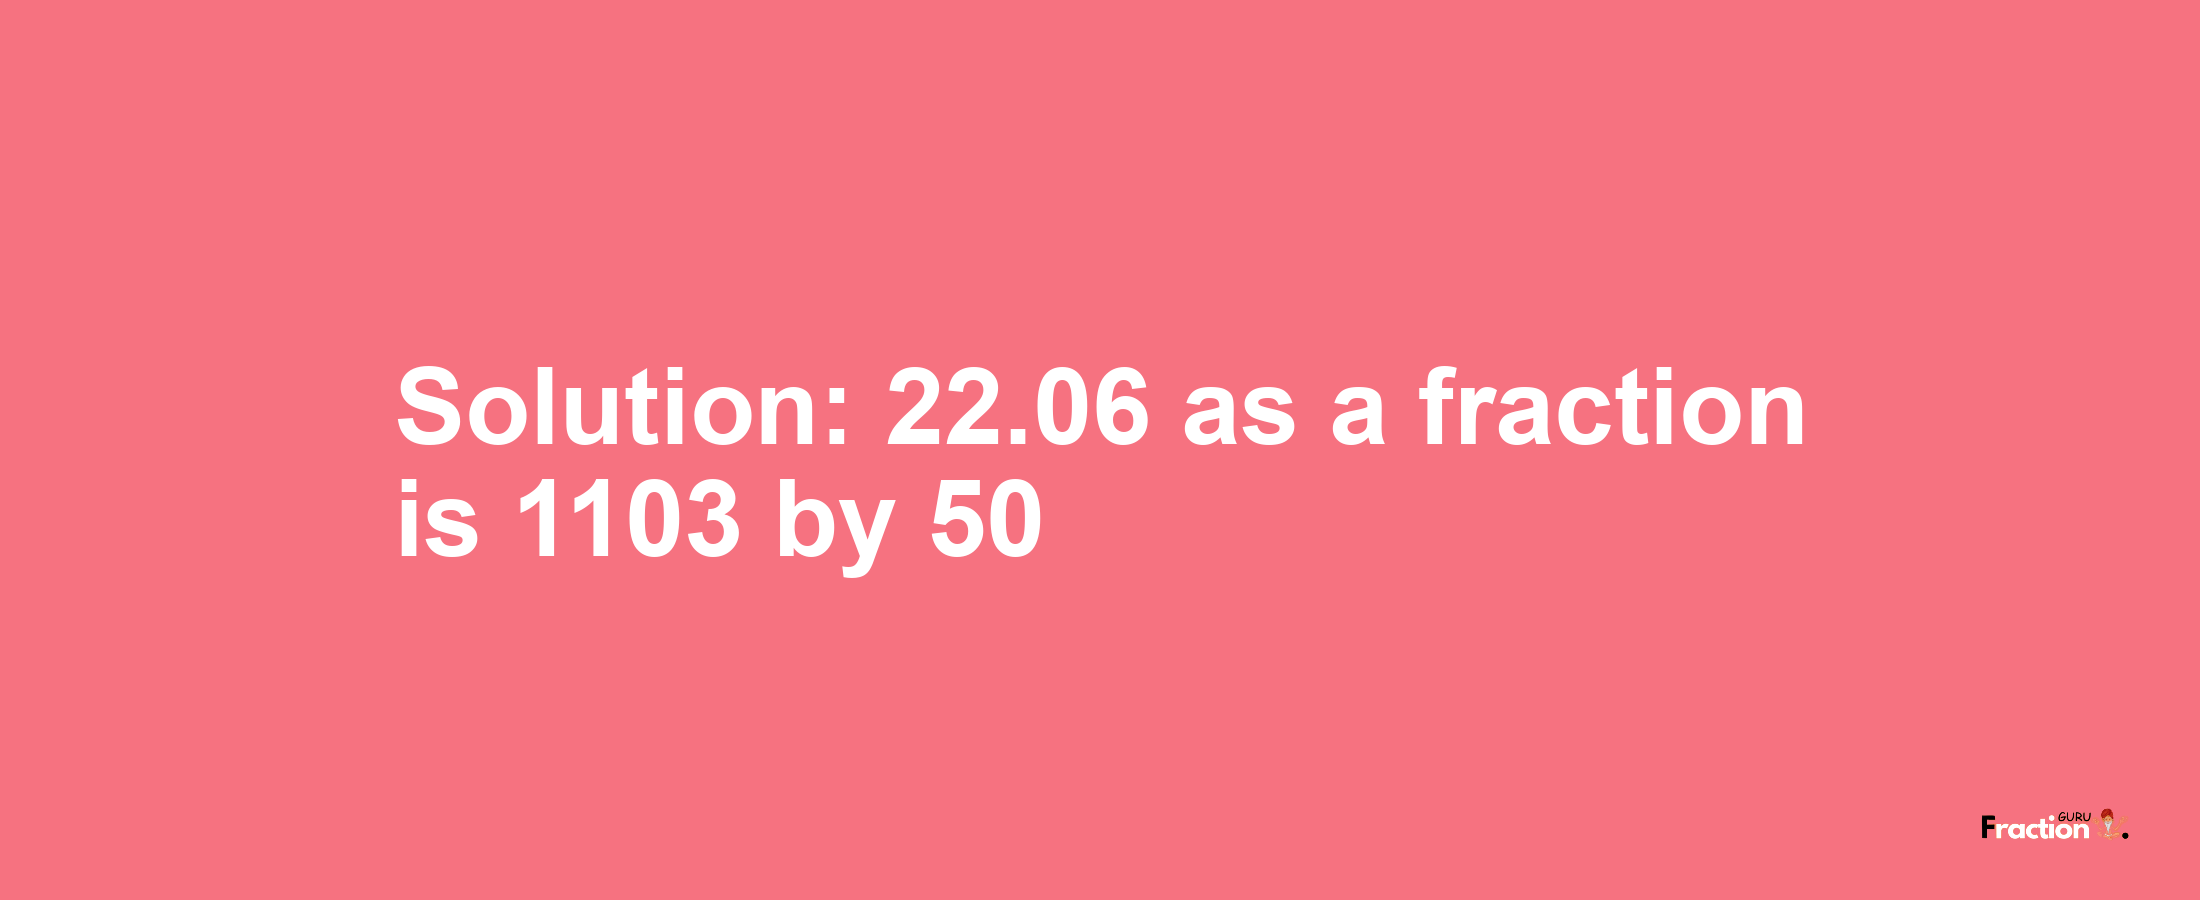 Solution:22.06 as a fraction is 1103/50